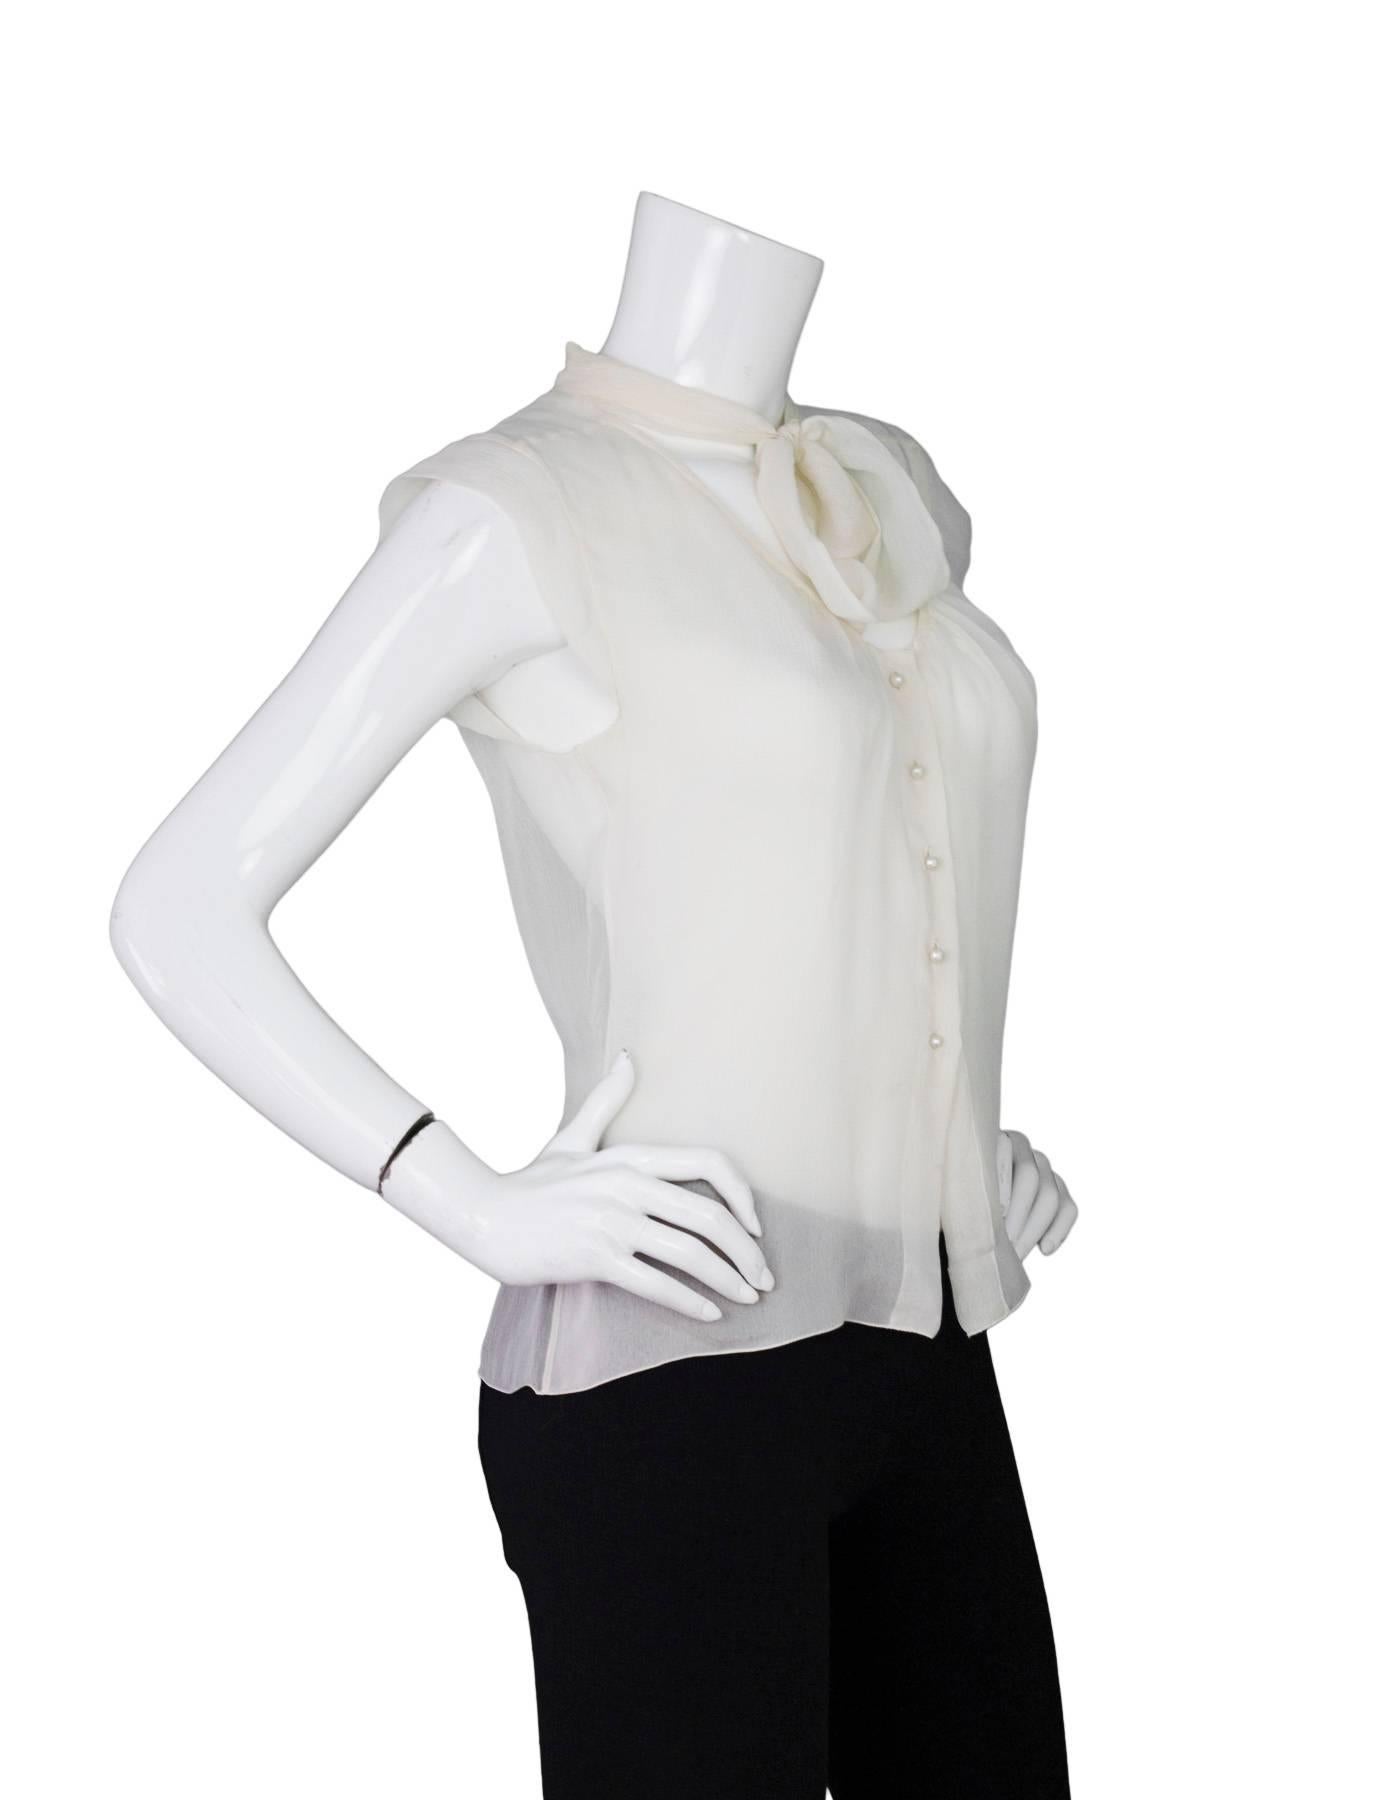 Chanel Ivory Silk Sheer Blouse 
Features tie at neckline and small faux pearl CC buttons

Color: Ivory
Composition: Not given- believed to be 100% silk
Lining: None
Closure/Opening: Pull over
Exterior Pockets: None
Interior Pockets: None
Overall